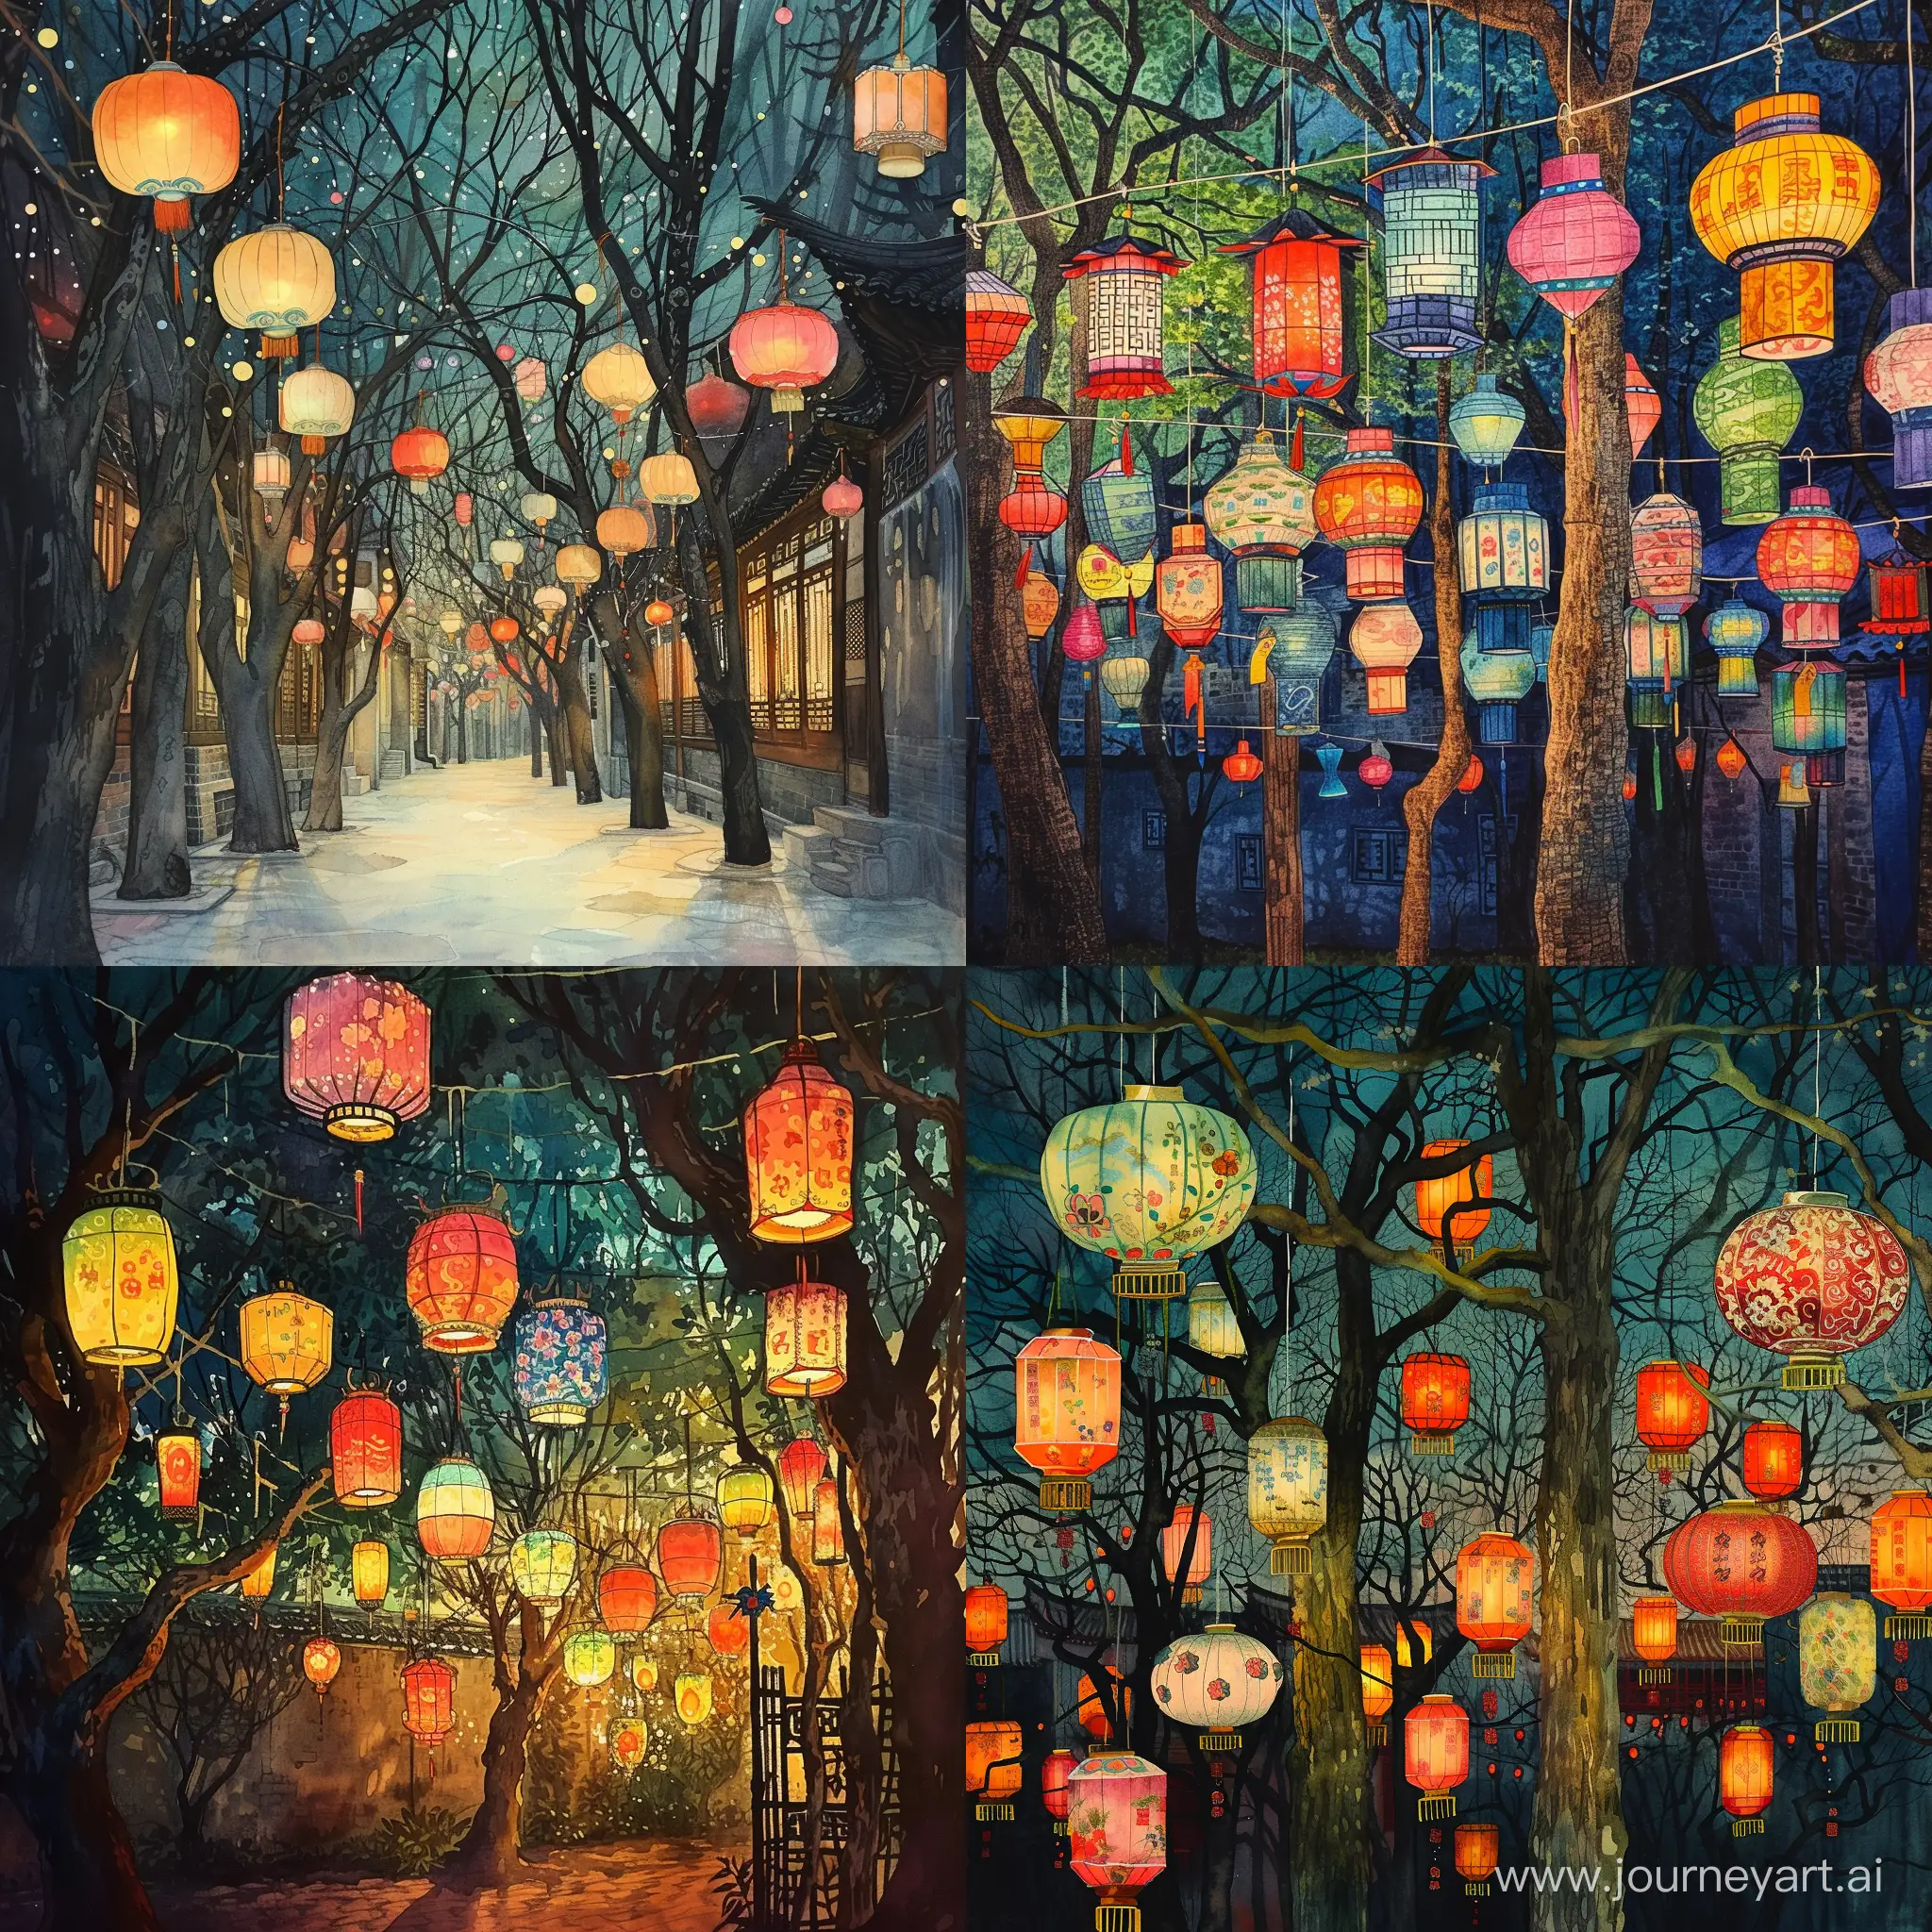 Chinese Spring Festival night, watercolour paintingpainting of colorful designs, The Beijing Hutongstreets were illuminated by many many many lanternssuspended from the trees., josan gonzalez